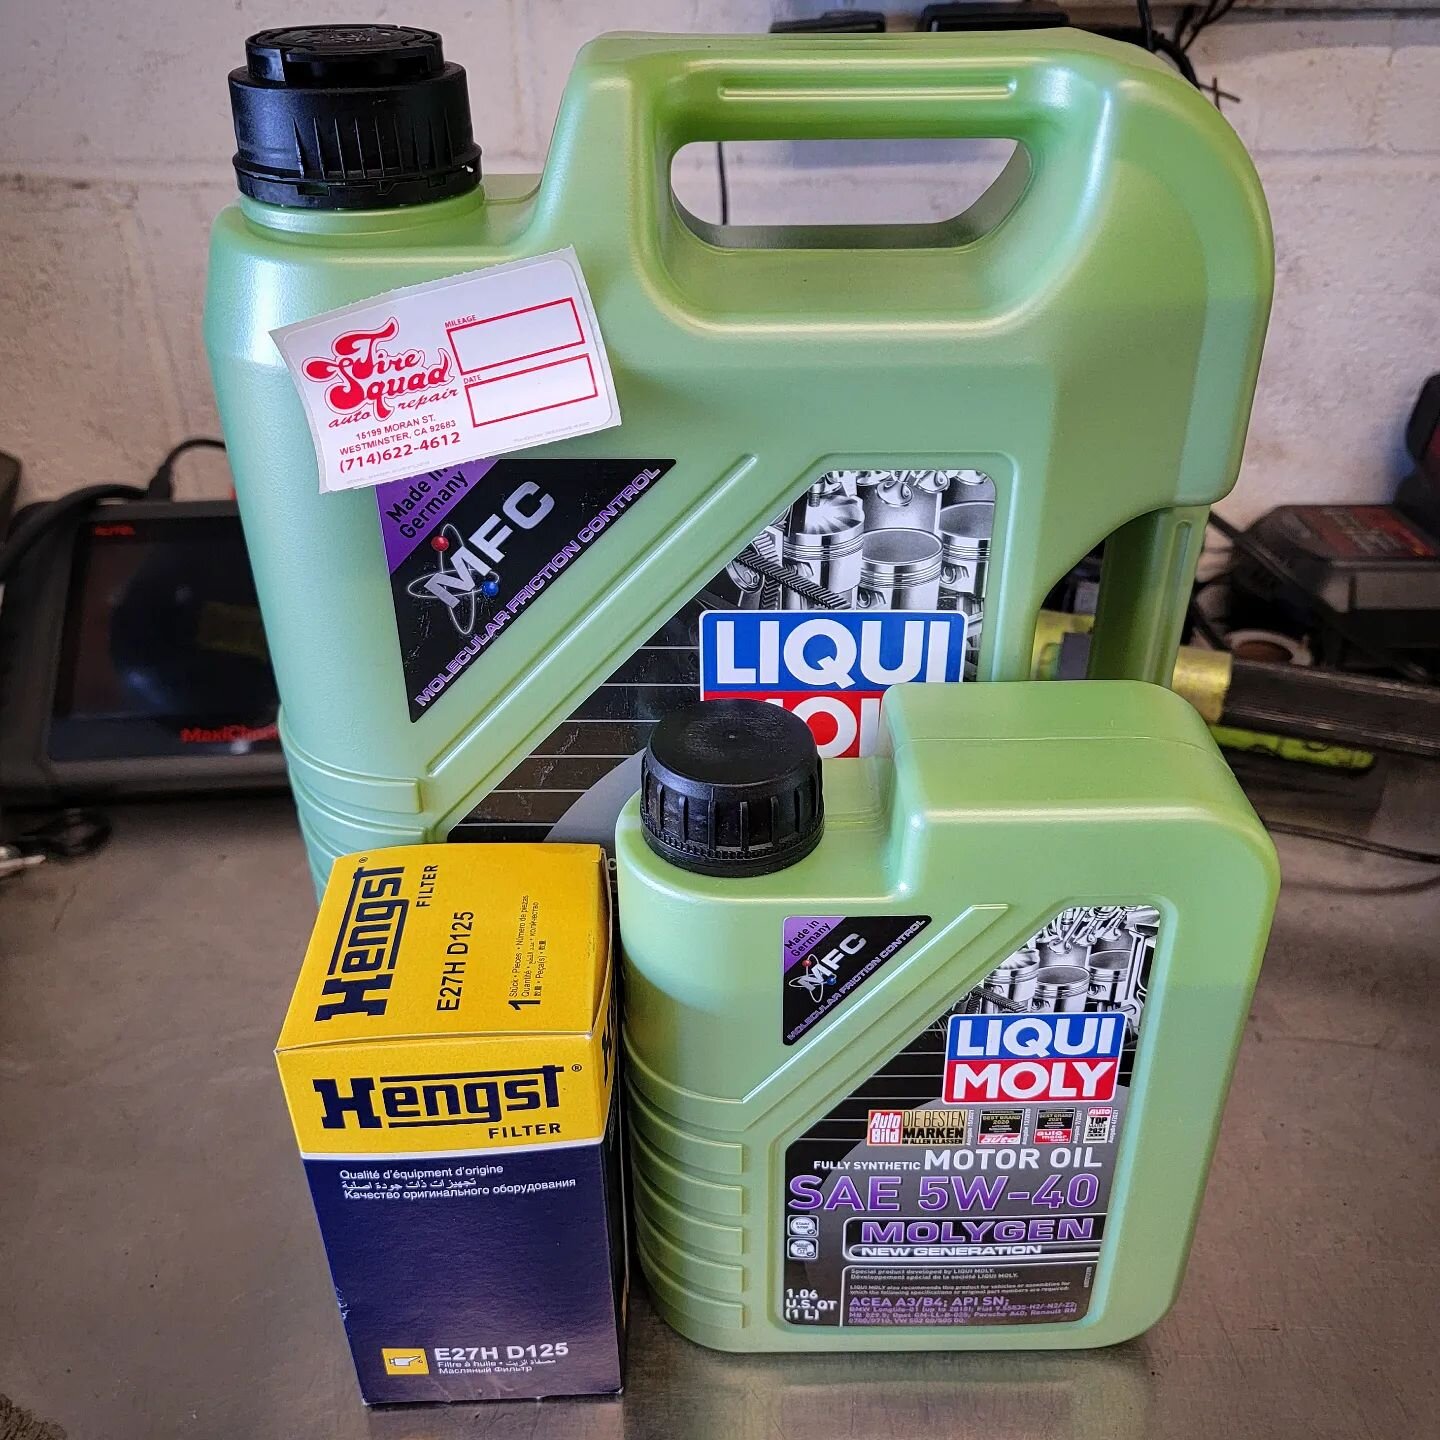 Oil change kit going to one of our customers. If you like working on your car(s) at home and doing the maintenance yourself, we can help get you top shelf parts and oils! Hit us up to see how we can help you with your weekend project. Same day pick u